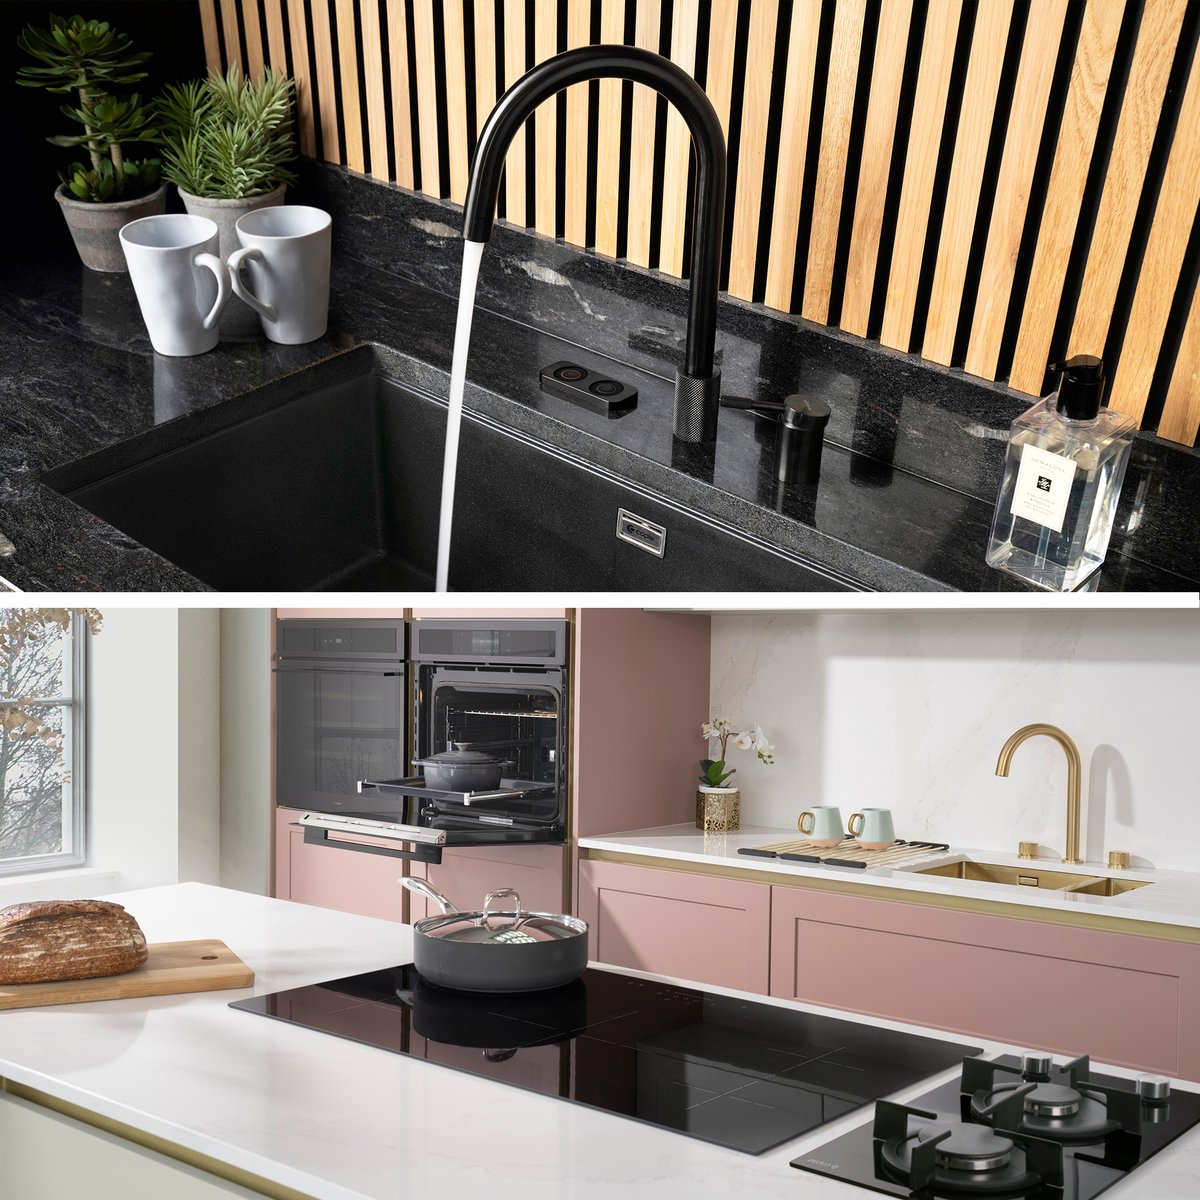 In a world where convenience & efficiency are essential, @Caple's advanced tech and refined design are transforming kitchens. Instant filtered water and precision induction cooking are just two ways @Caple is reshaping the kitchen experience. #ad